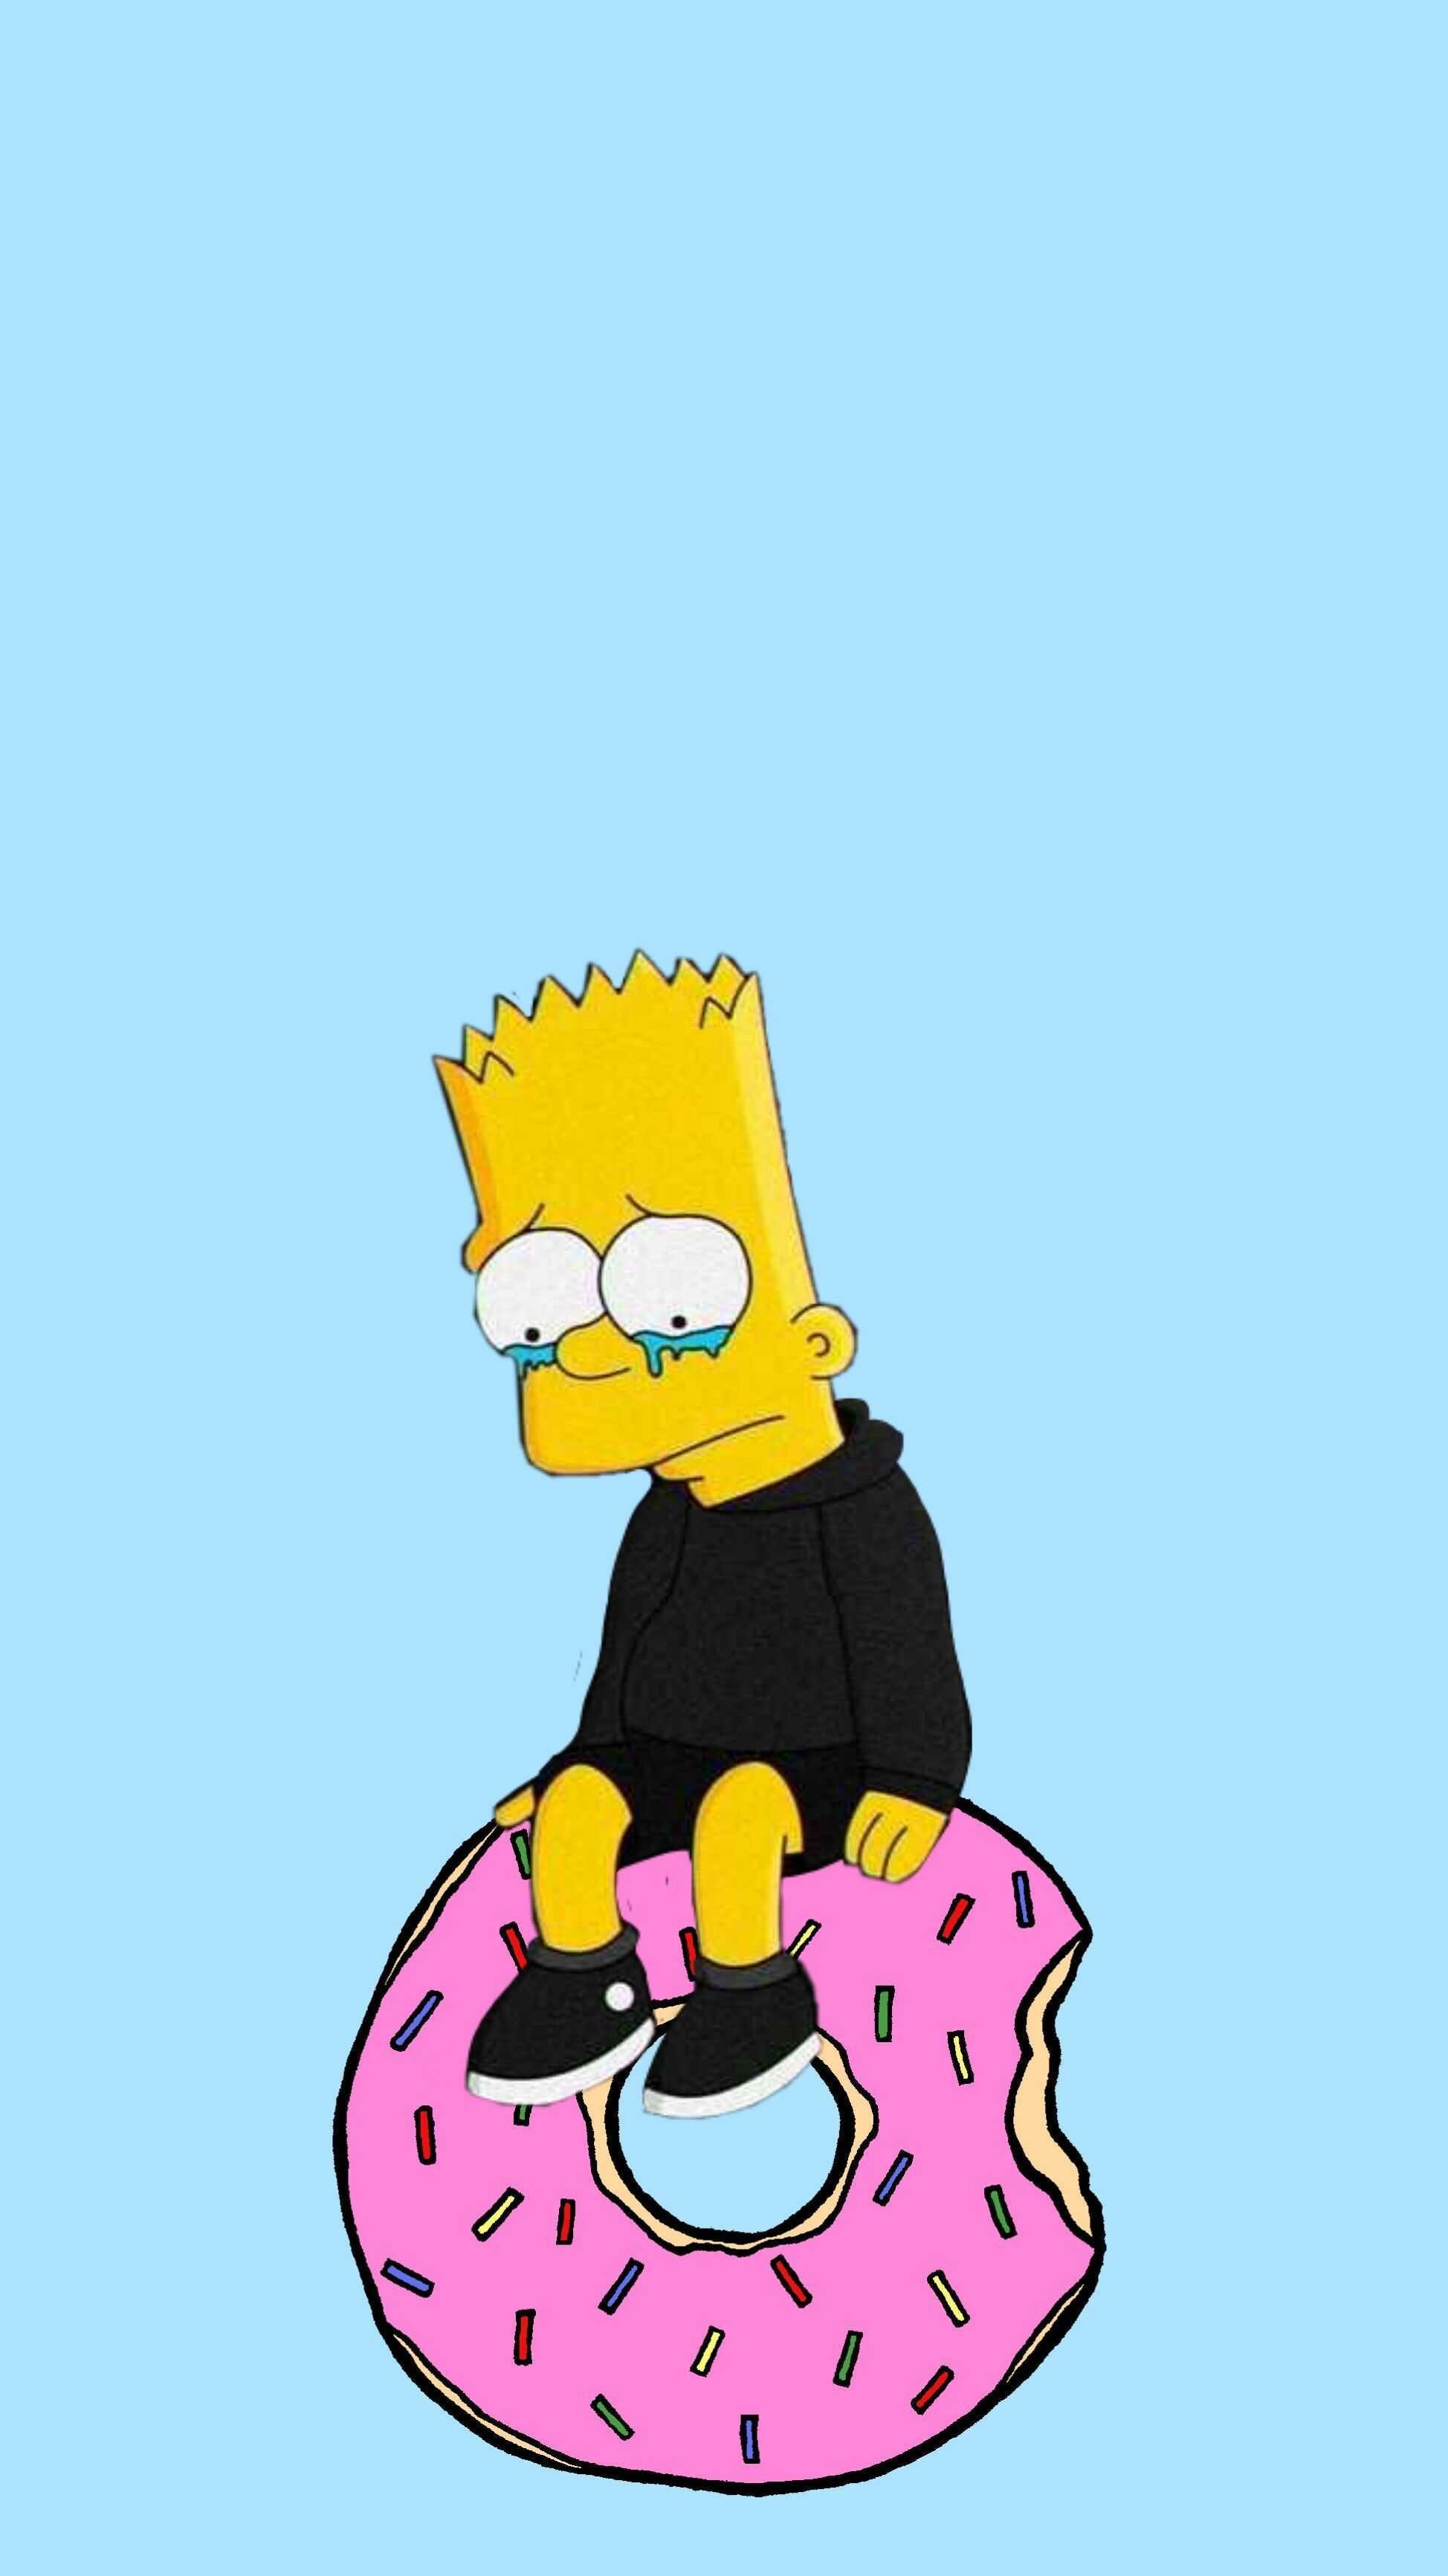 The Simpsons: Bart, has been nicknamed "Cosmo", after discovering a comet in "Bart's Comet". 1950x3470 HD Wallpaper.